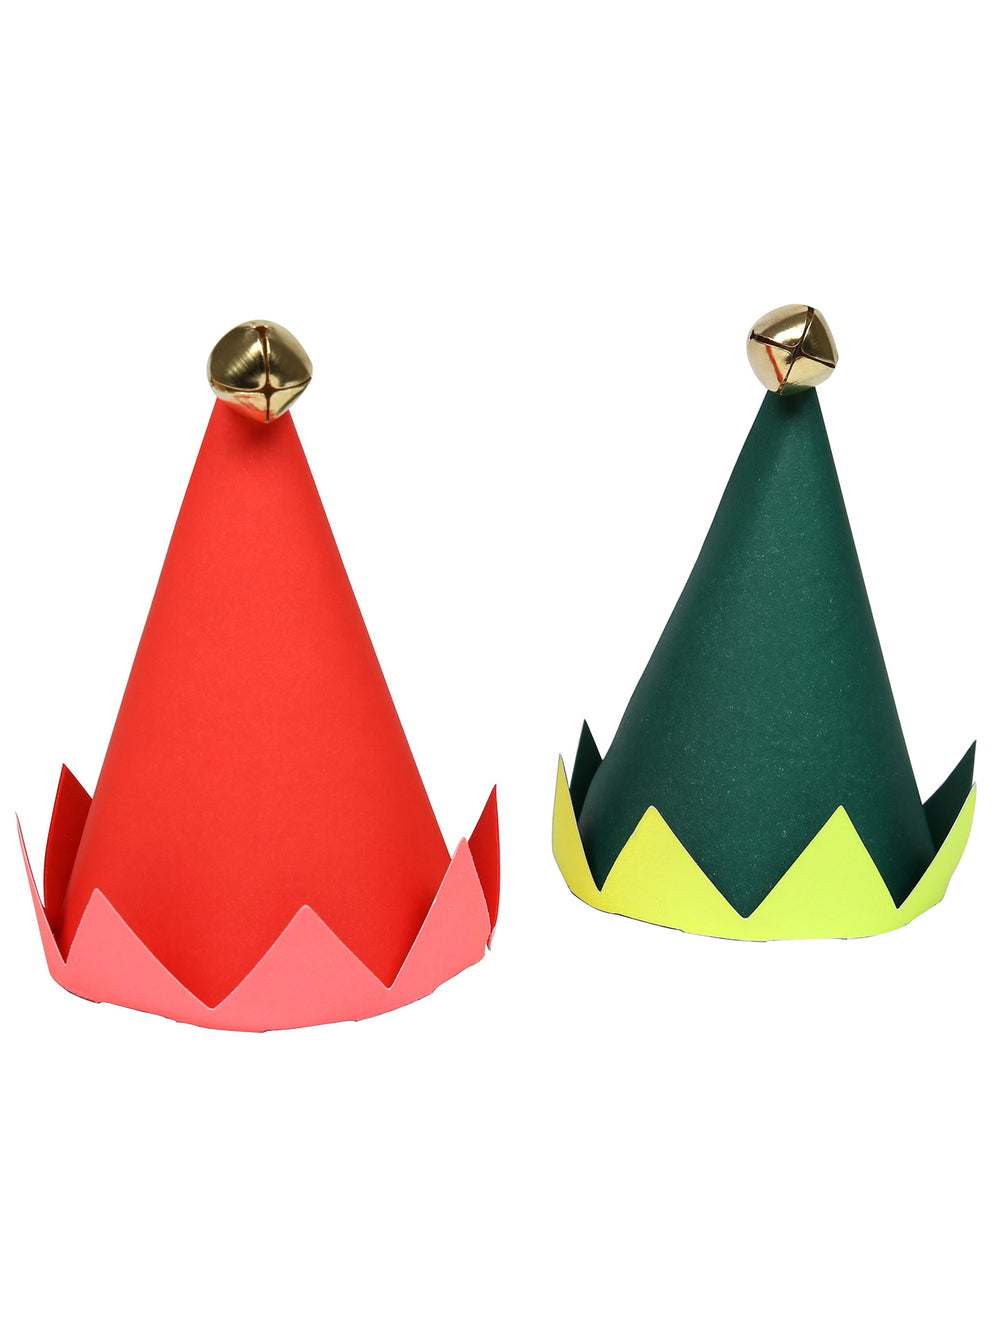  Mini elf hats, made of paper in green and red with each hat topped with a jingle bell. Perfect as a small gift or favor for a kids holiday party or celebration.